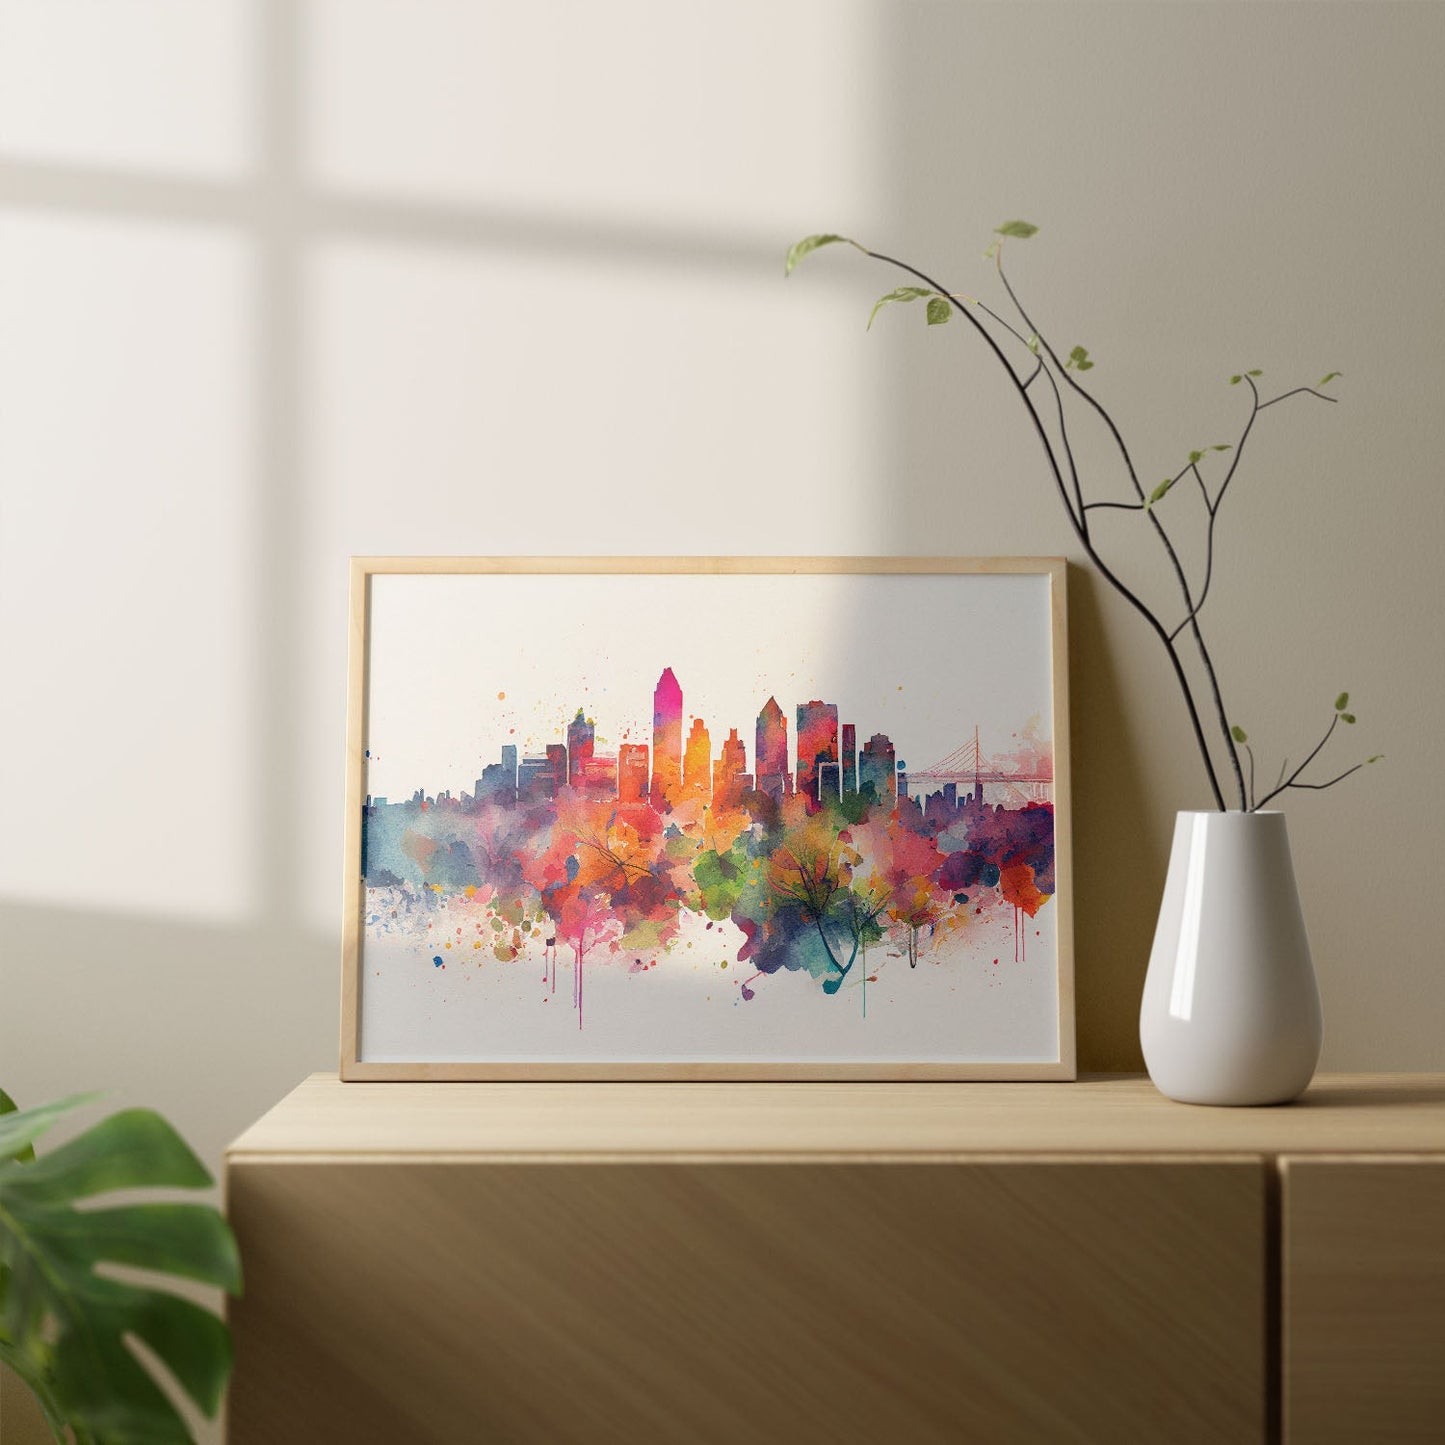 Nacnic watercolor of a skyline of the city of Montreal_1. Aesthetic Wall Art Prints for Bedroom or Living Room Design.